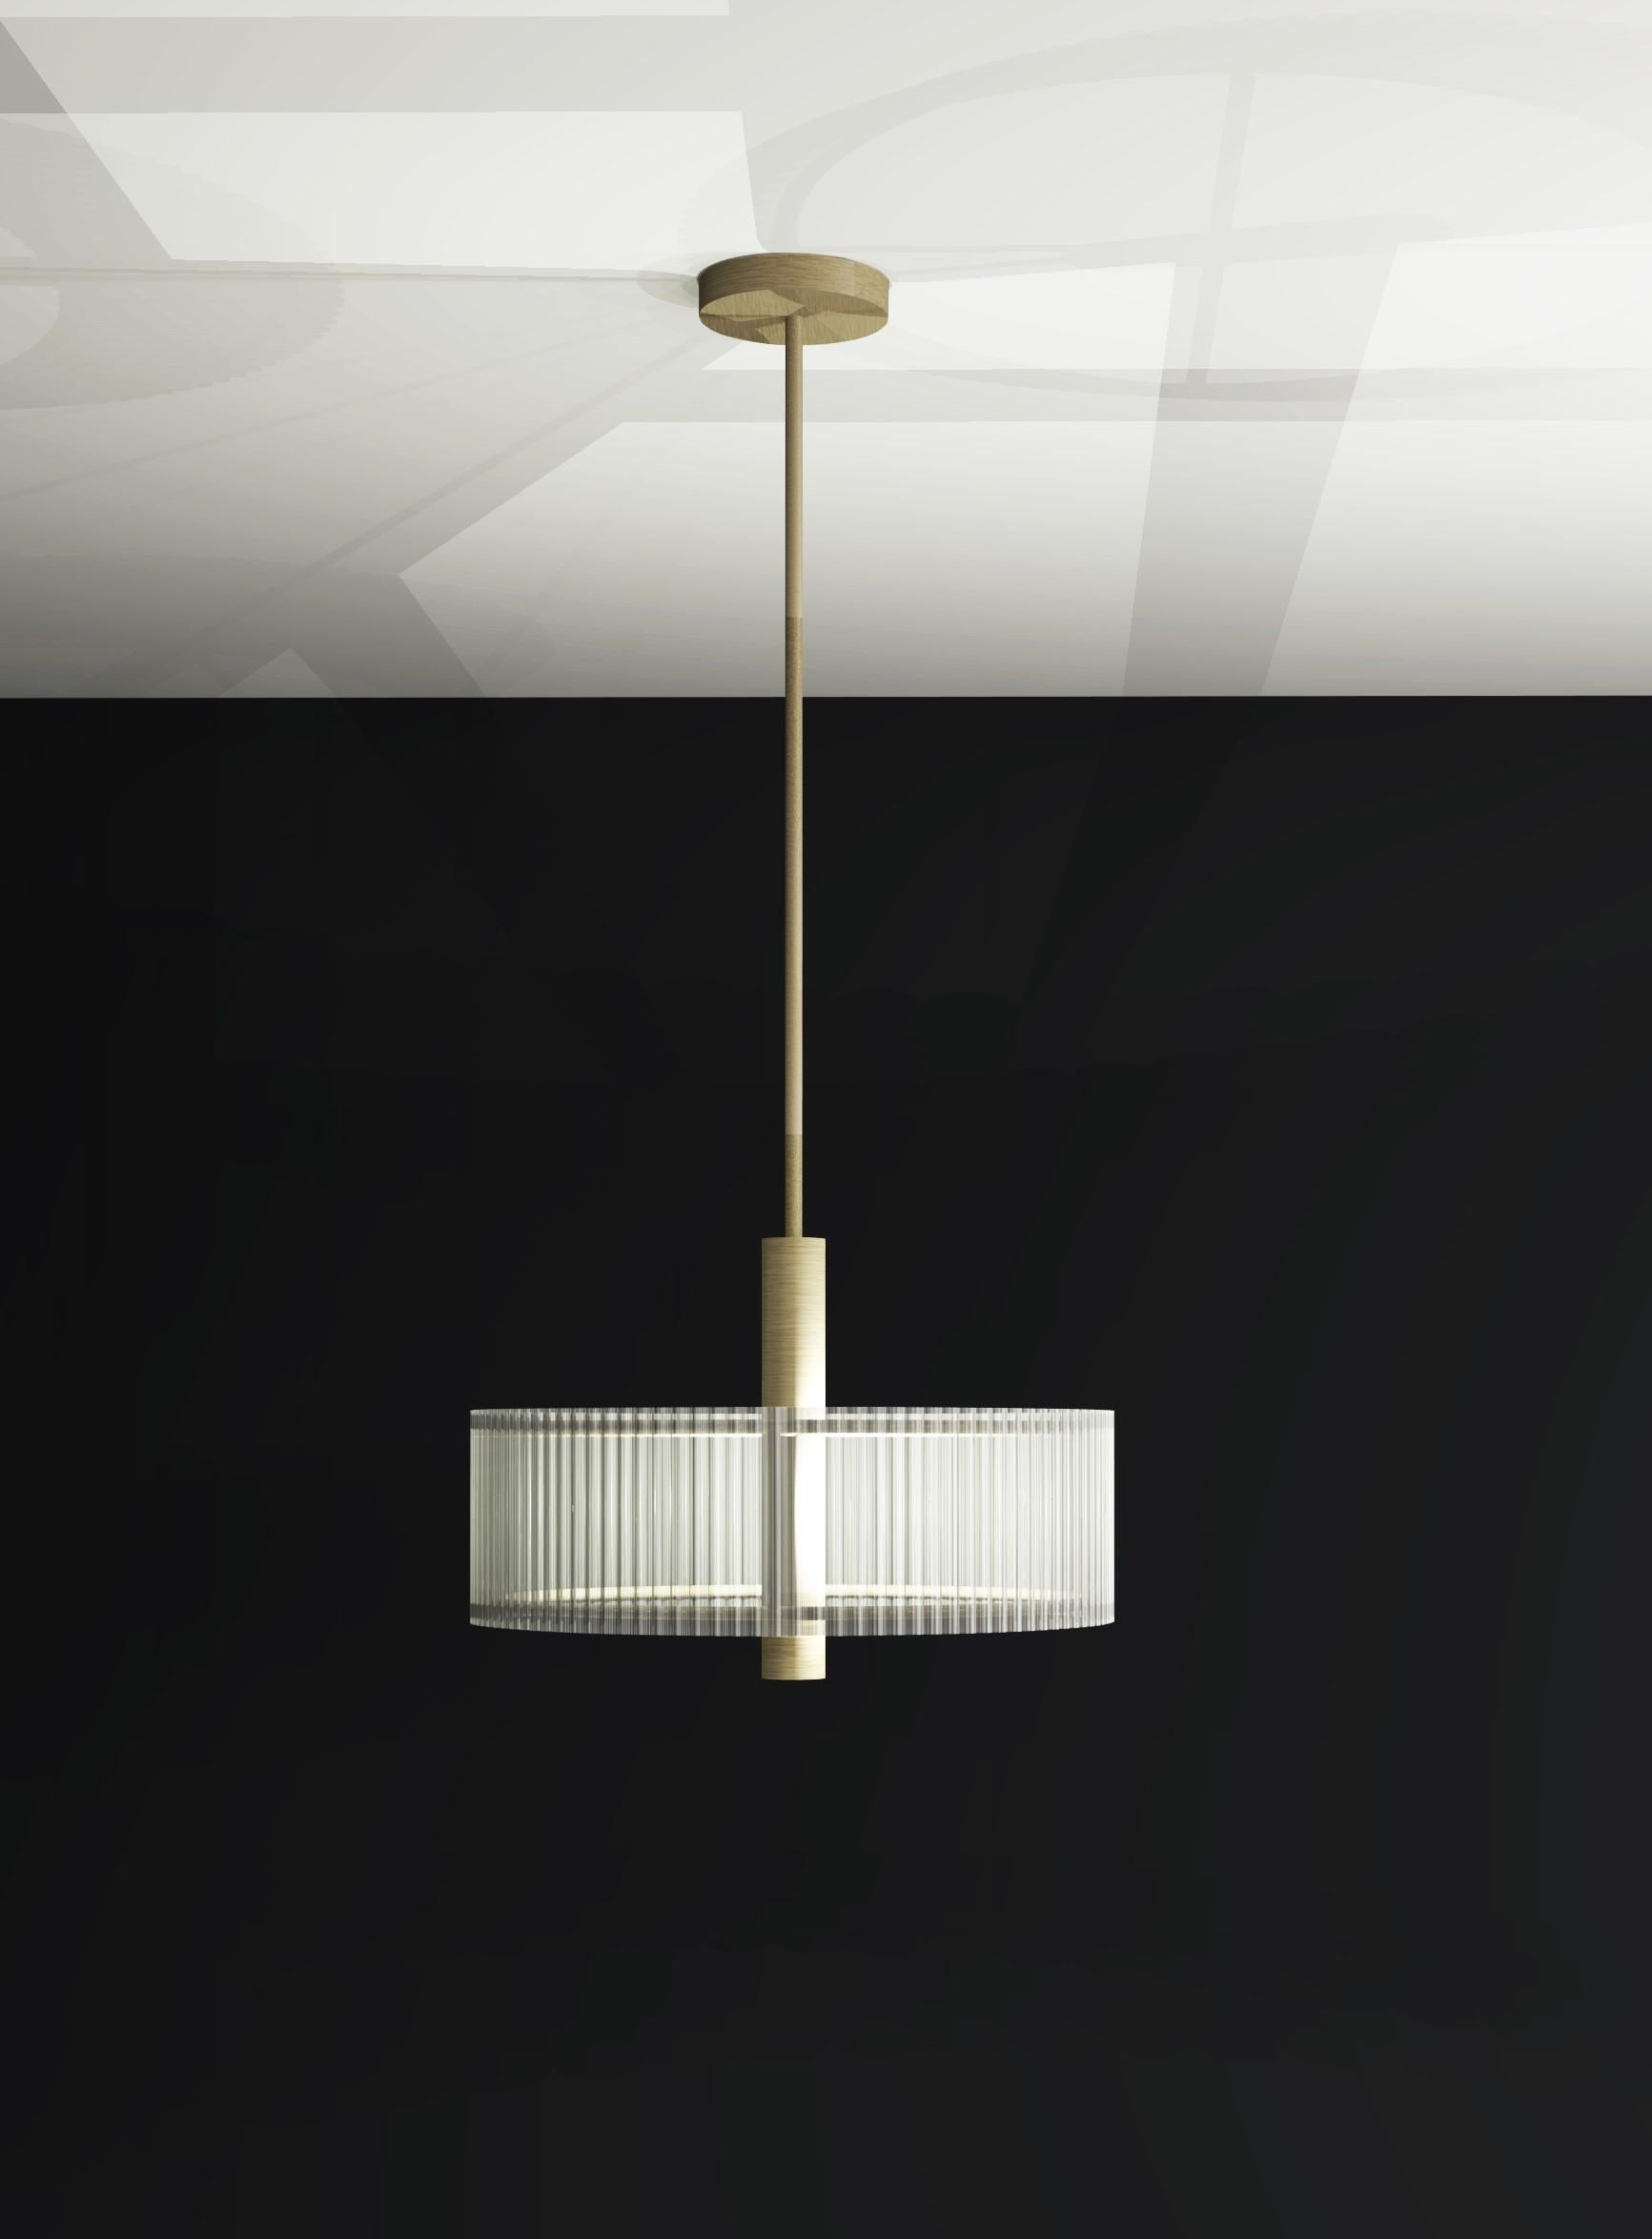 Contemporary pendant with fluted glass shade and brushed brass metalwork.

Diameter: 360mm
Shade Height: 120mm
Overall Height: 820mm

Made to order to buyer's specification. Variations to dimensions and finishes can be made.